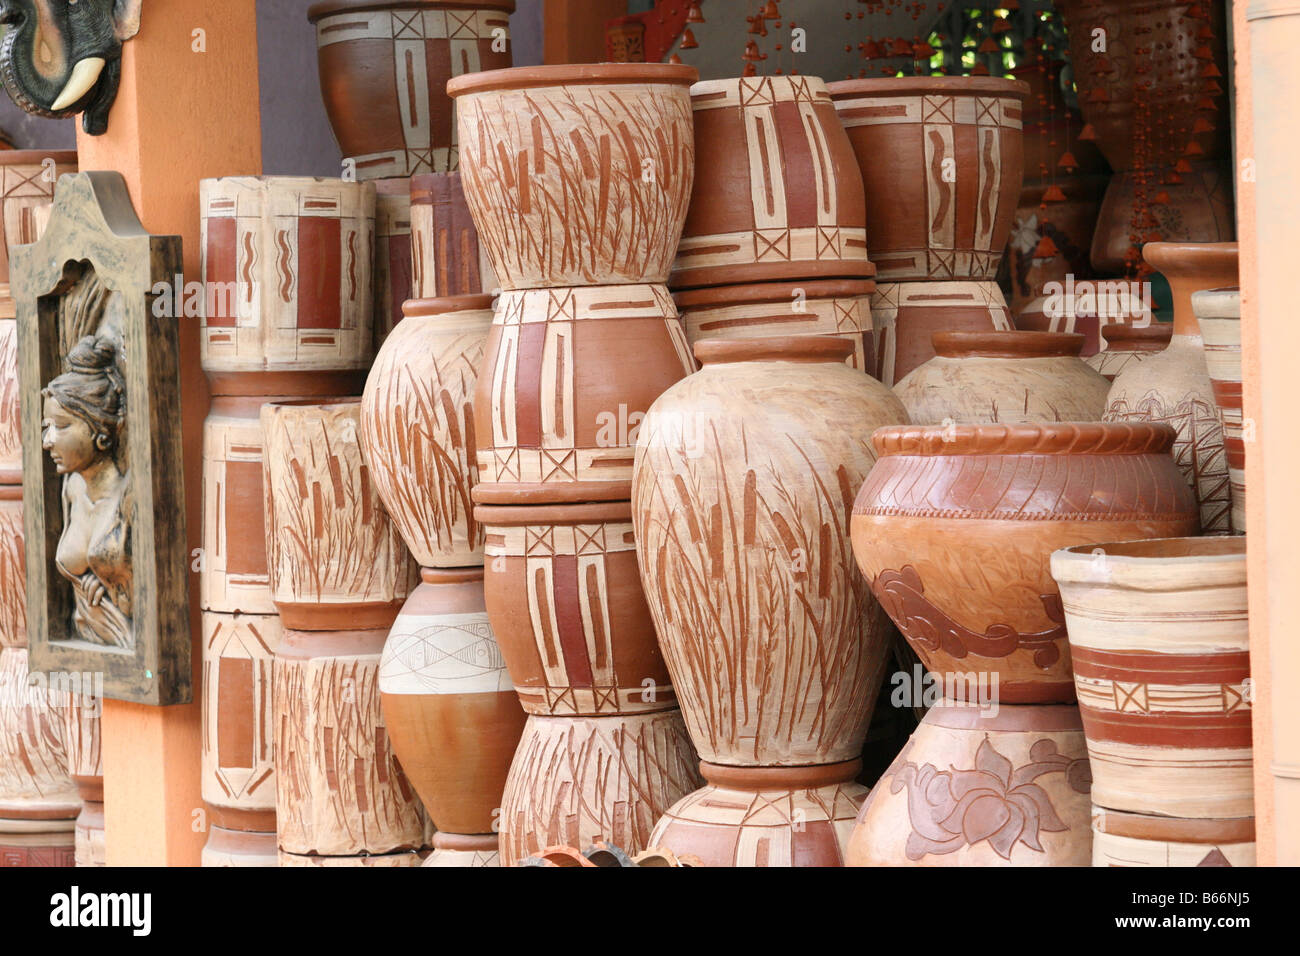 Clay Pots Roadside High Resolution Stock Photography And Images Alamy